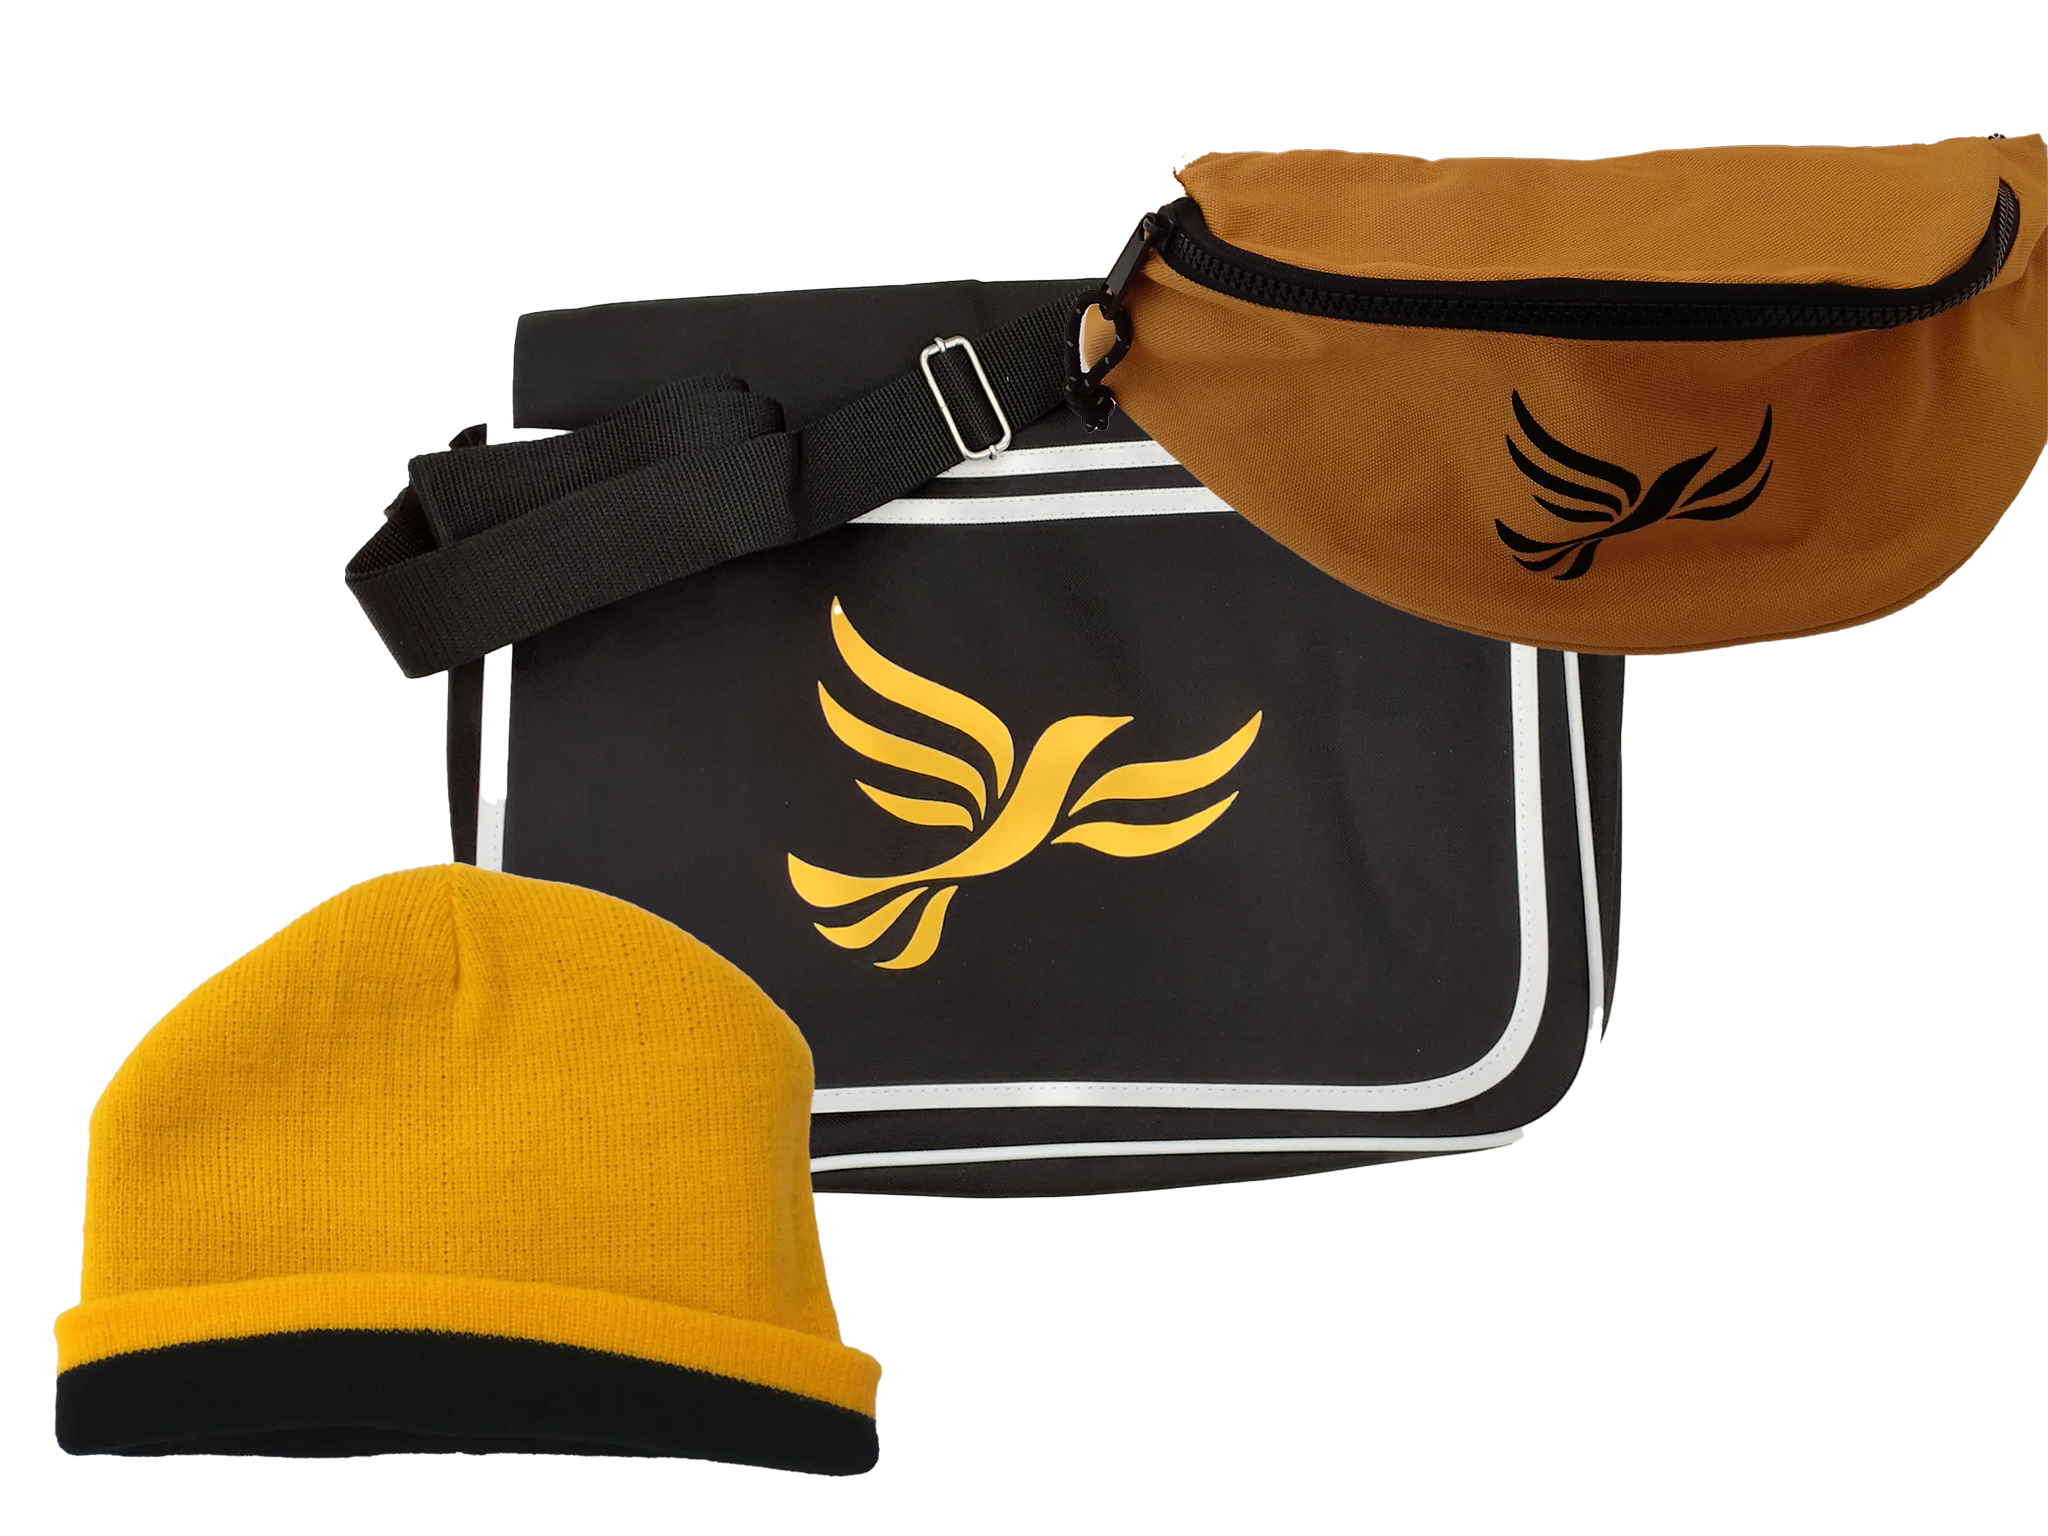 political merch has gone into overdrive – here’s the best (and worst) from the major parties